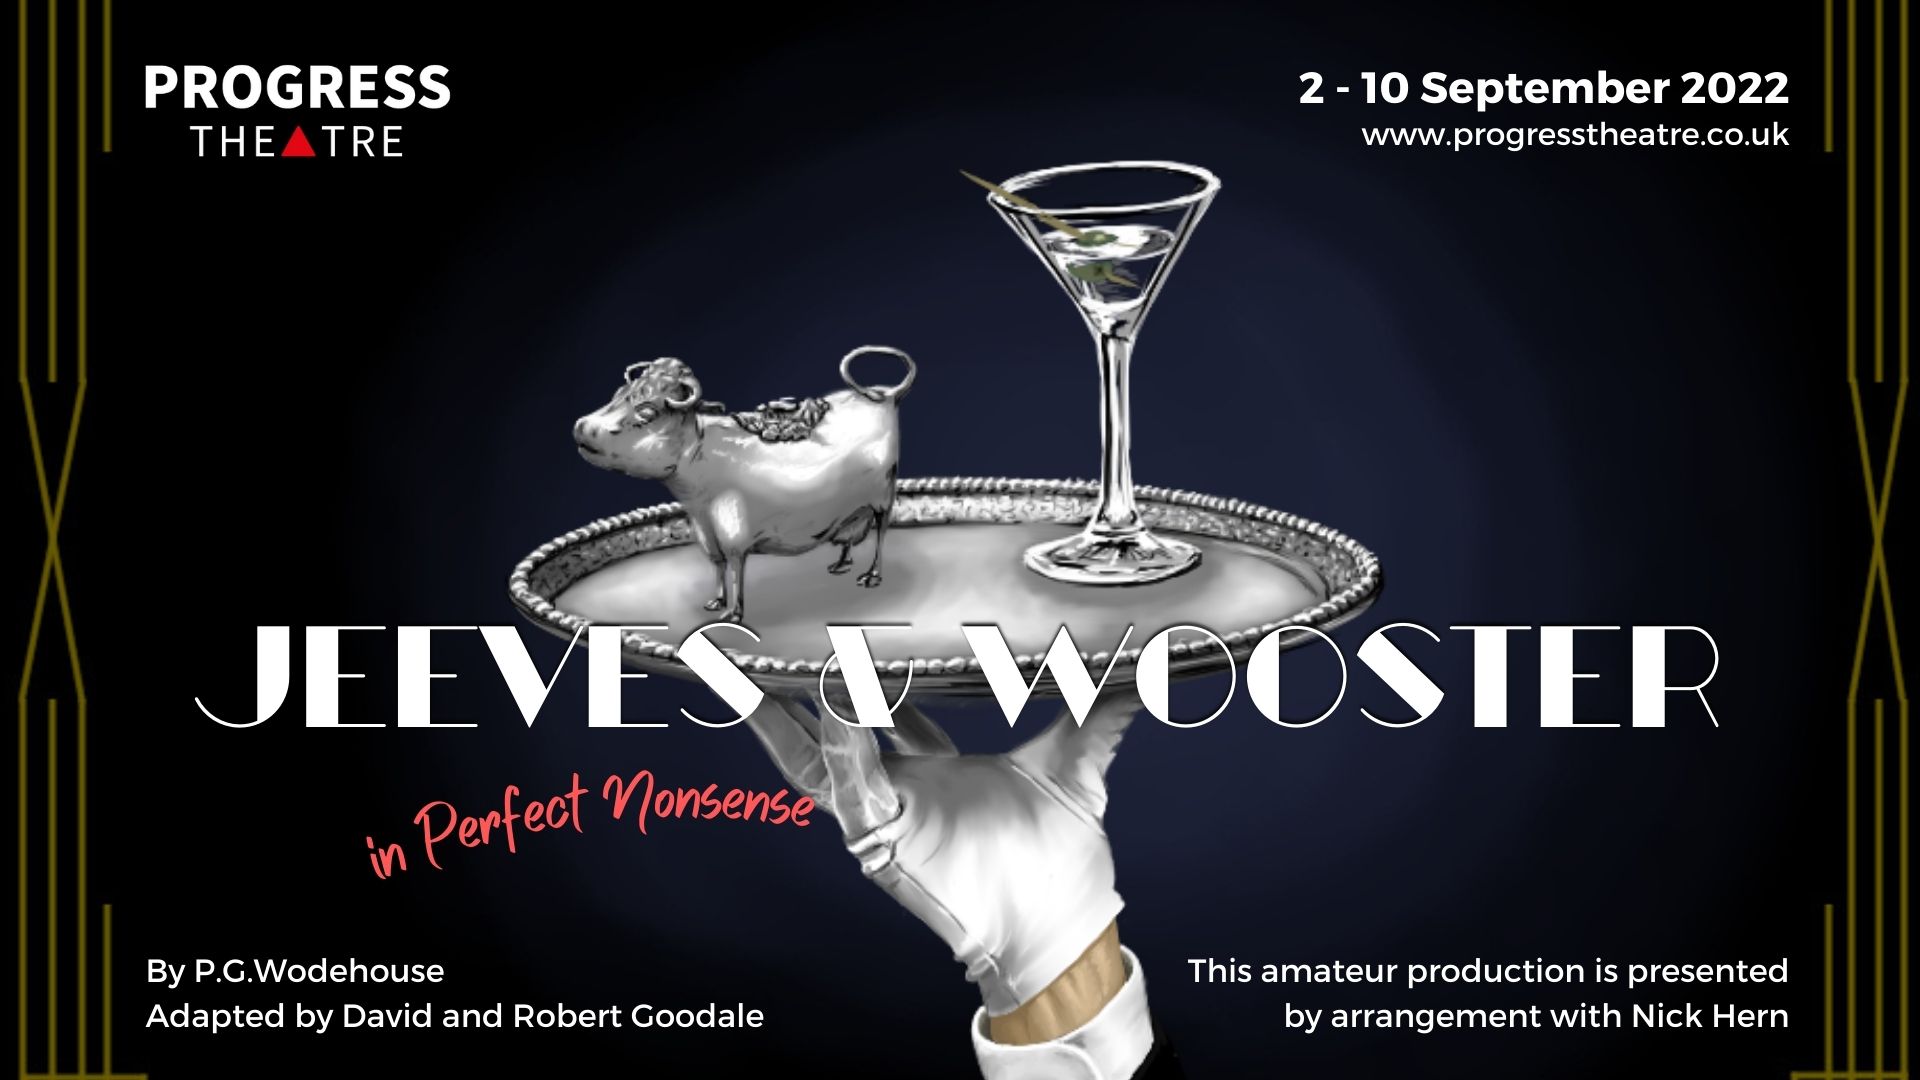 Jeeves and Wooster in Perfect Nonsense, 2-10 September 2022